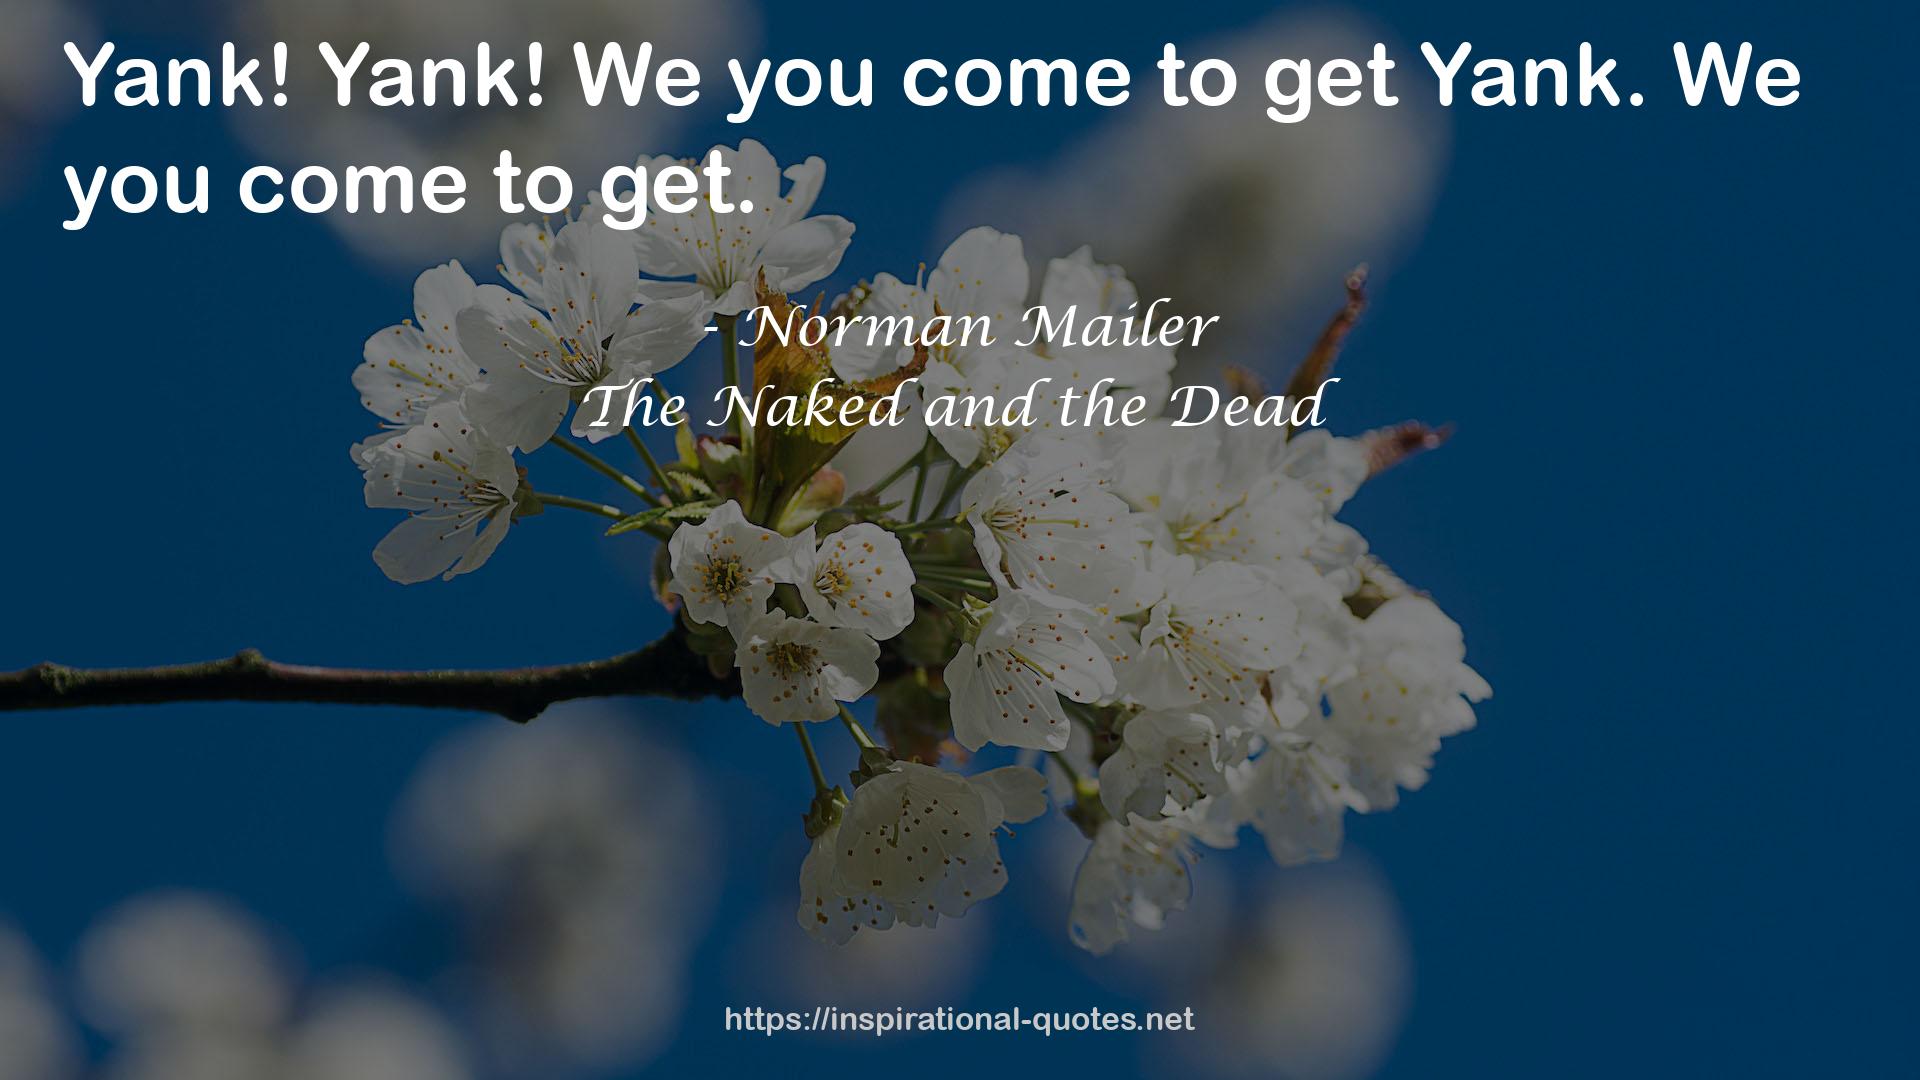 The Naked and the Dead QUOTES